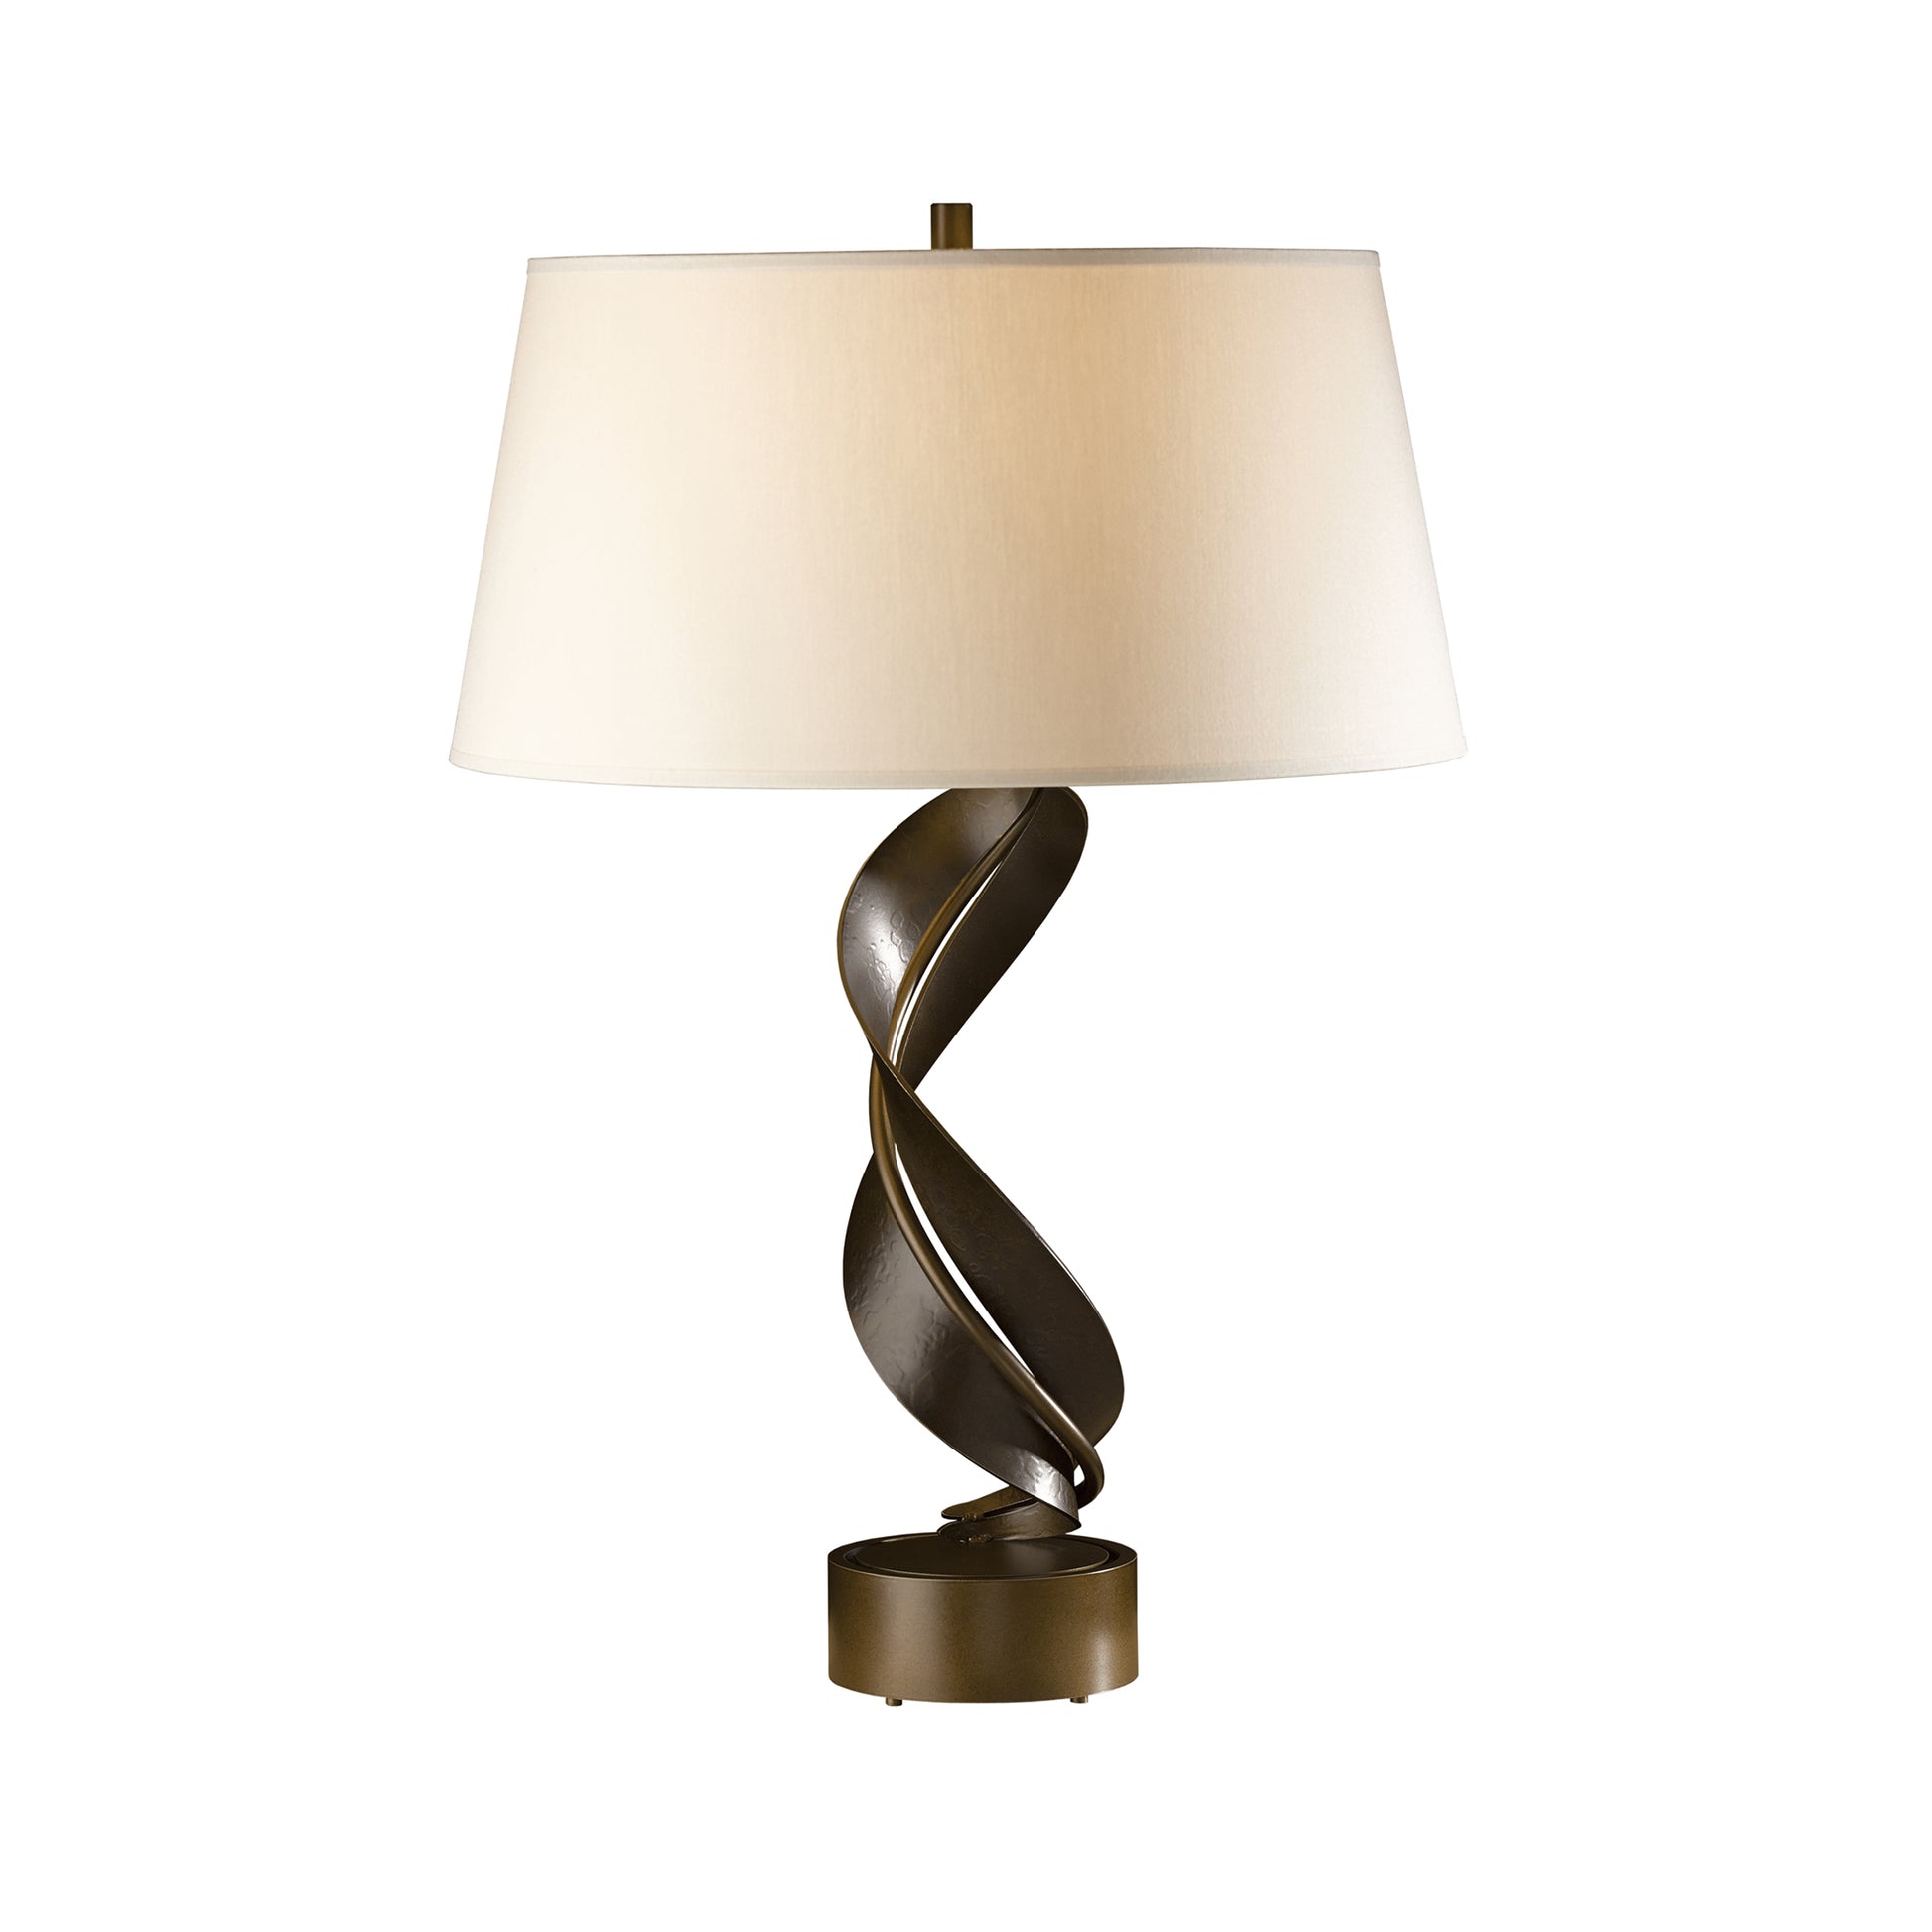 A hand-forged wrought iron Folio Table Lamp with a metal base and a beige shade, made in Vermont by Hubbardton Forge.